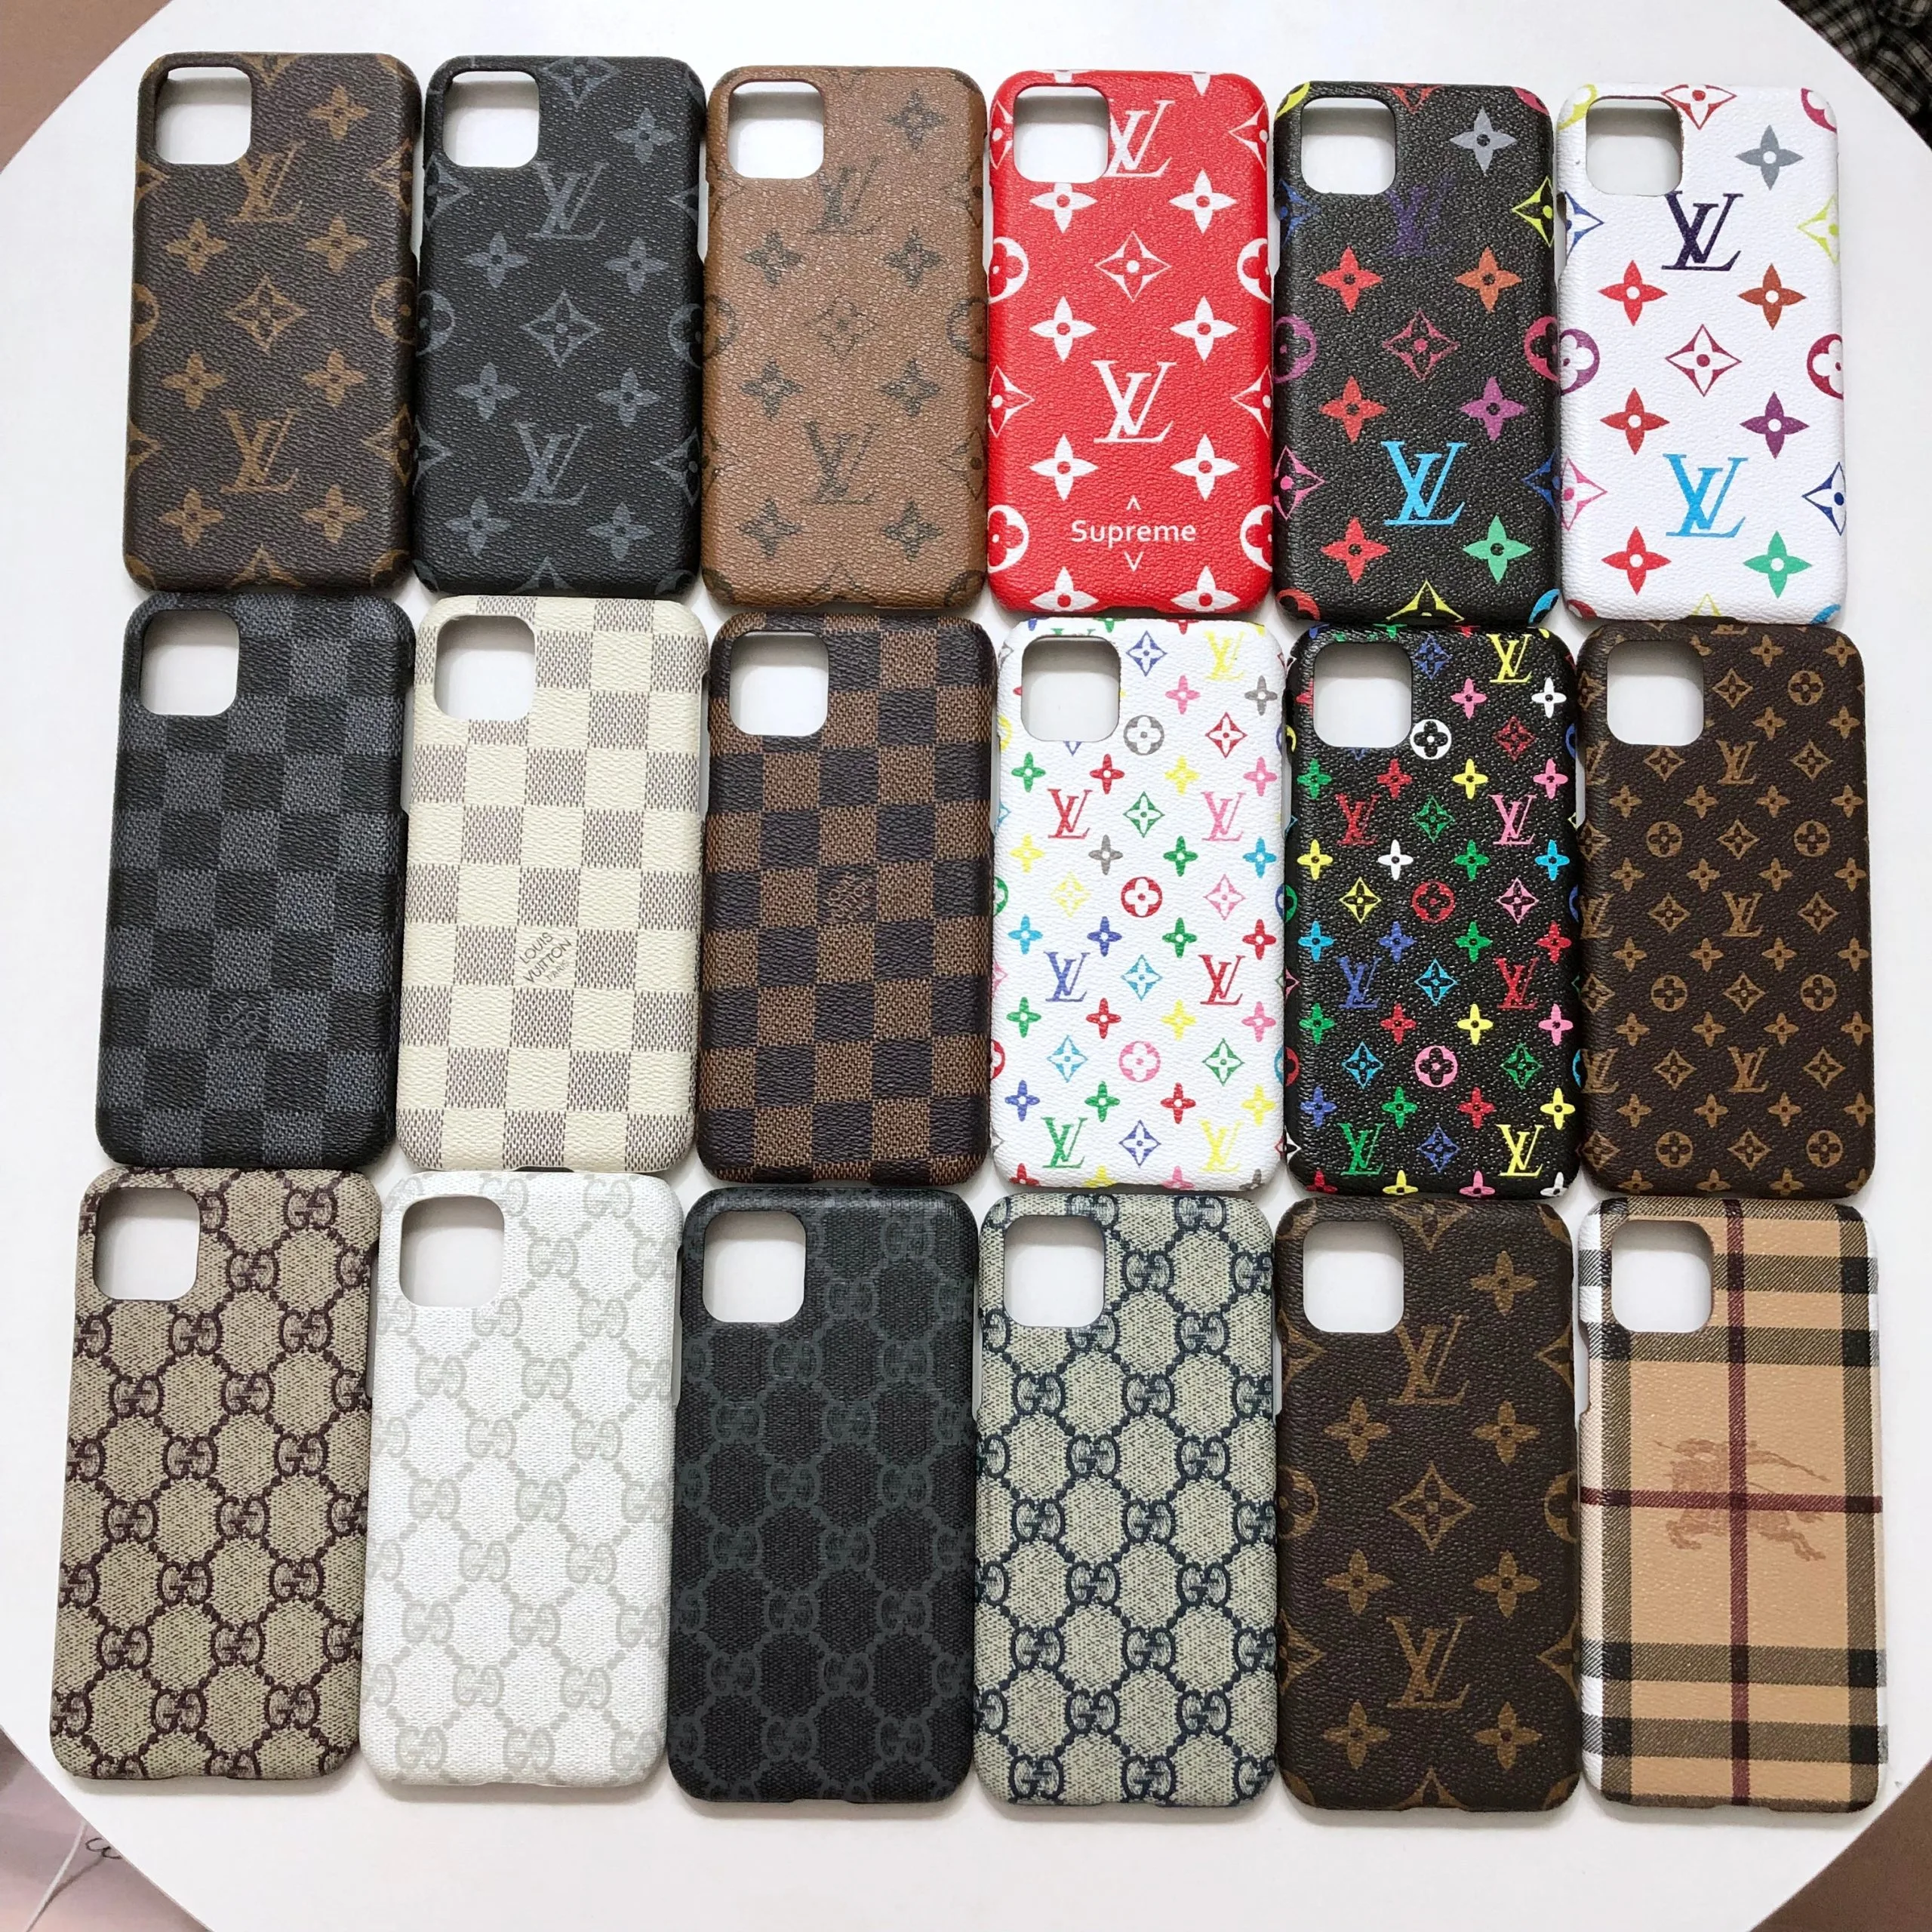 LUXURY LV LOUIS VUITTON SUPREME BURBERRY PHONE CASE FOR SAMSUNG